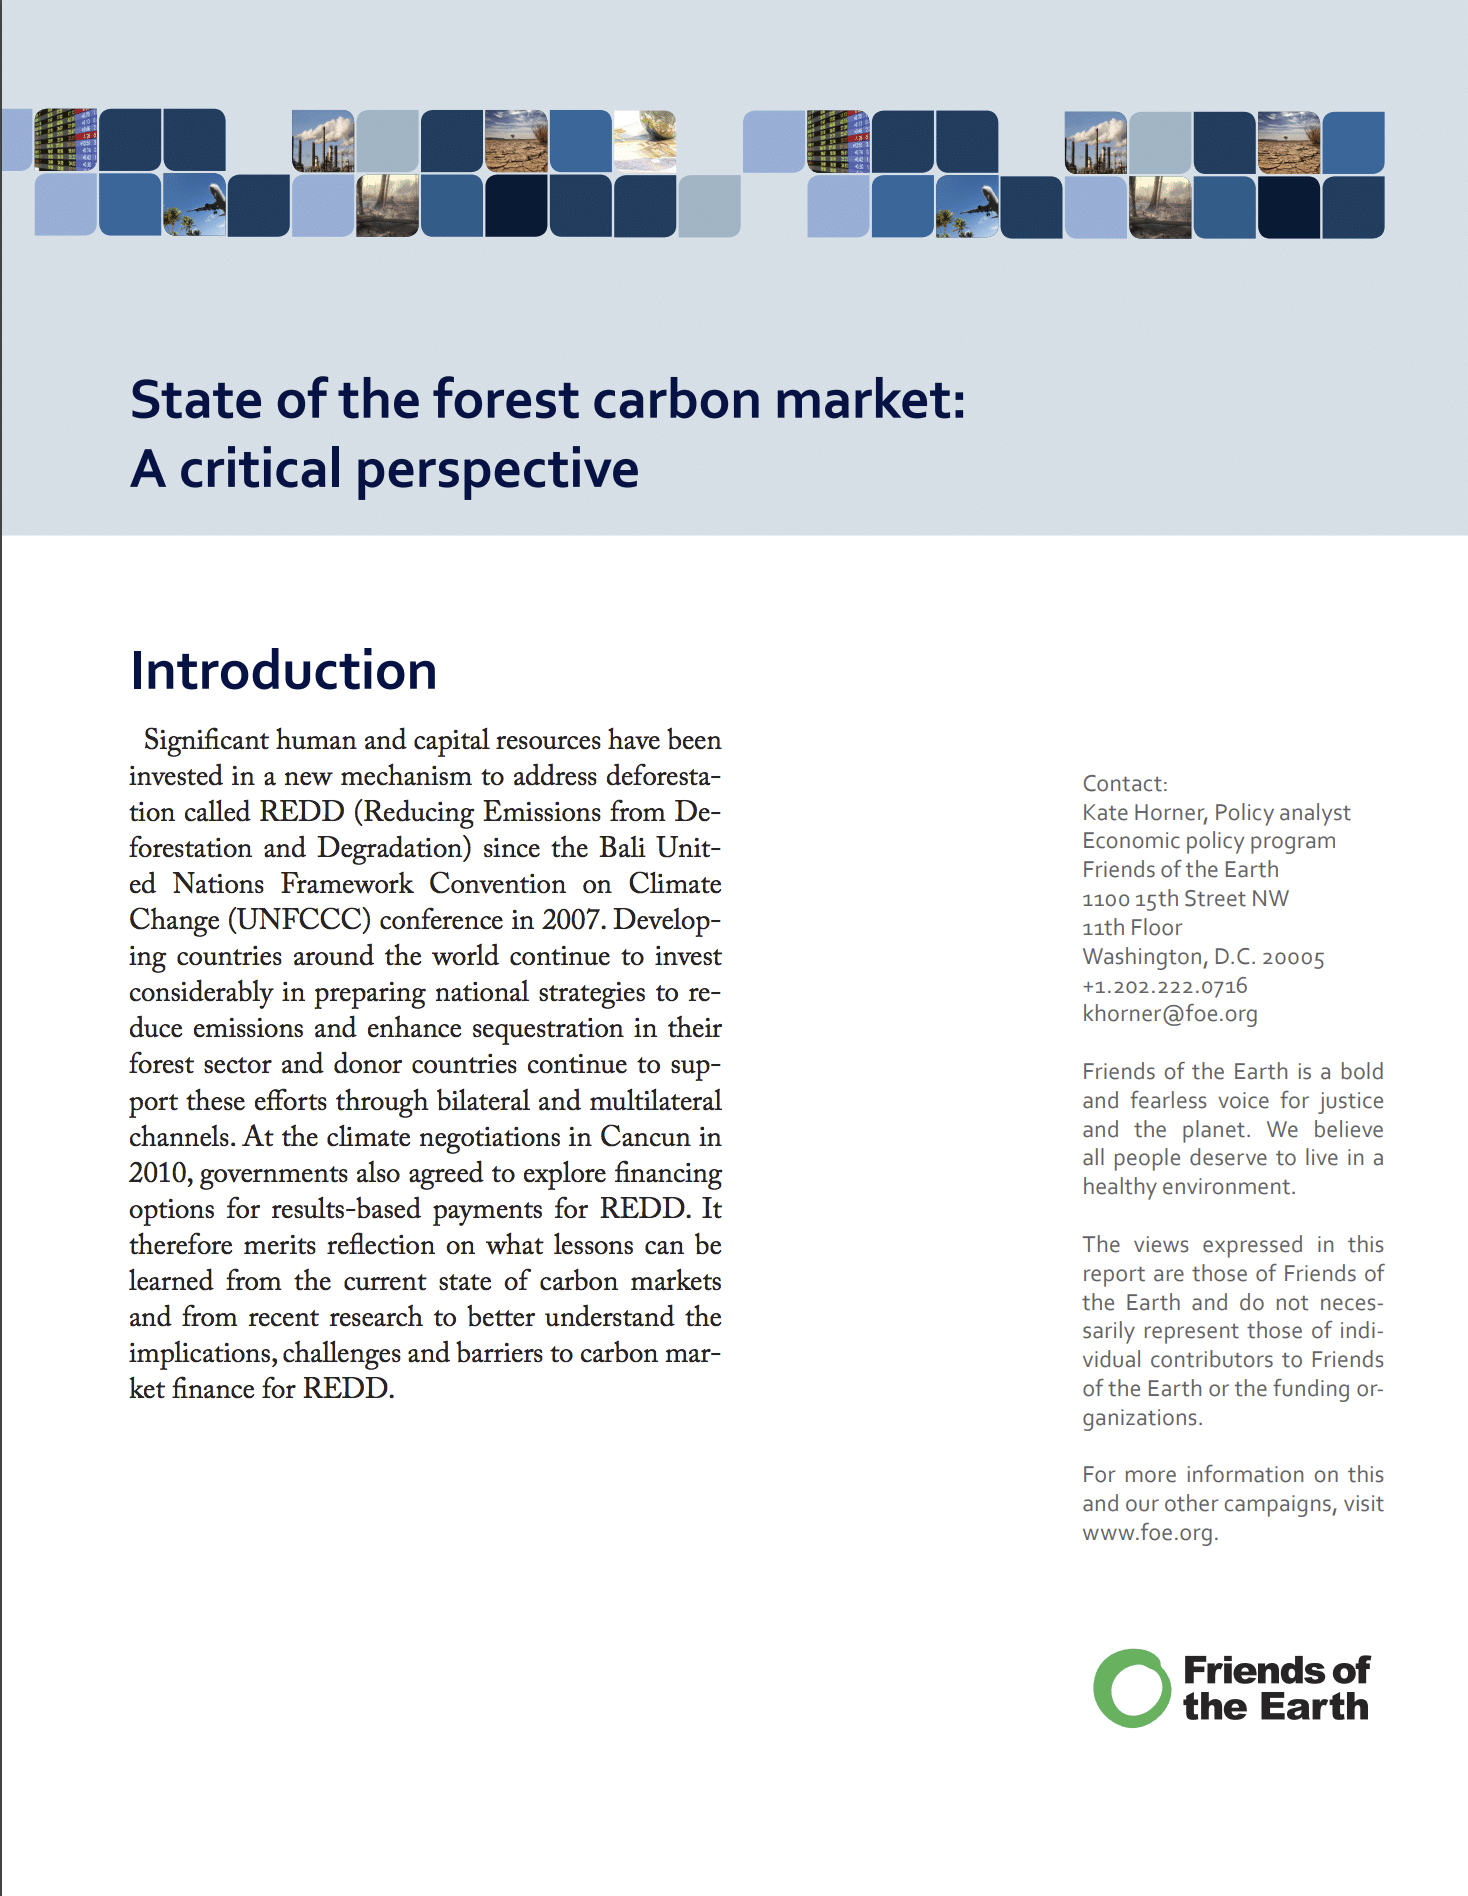 State the Forest Carbon Markets: A Critical Perspective